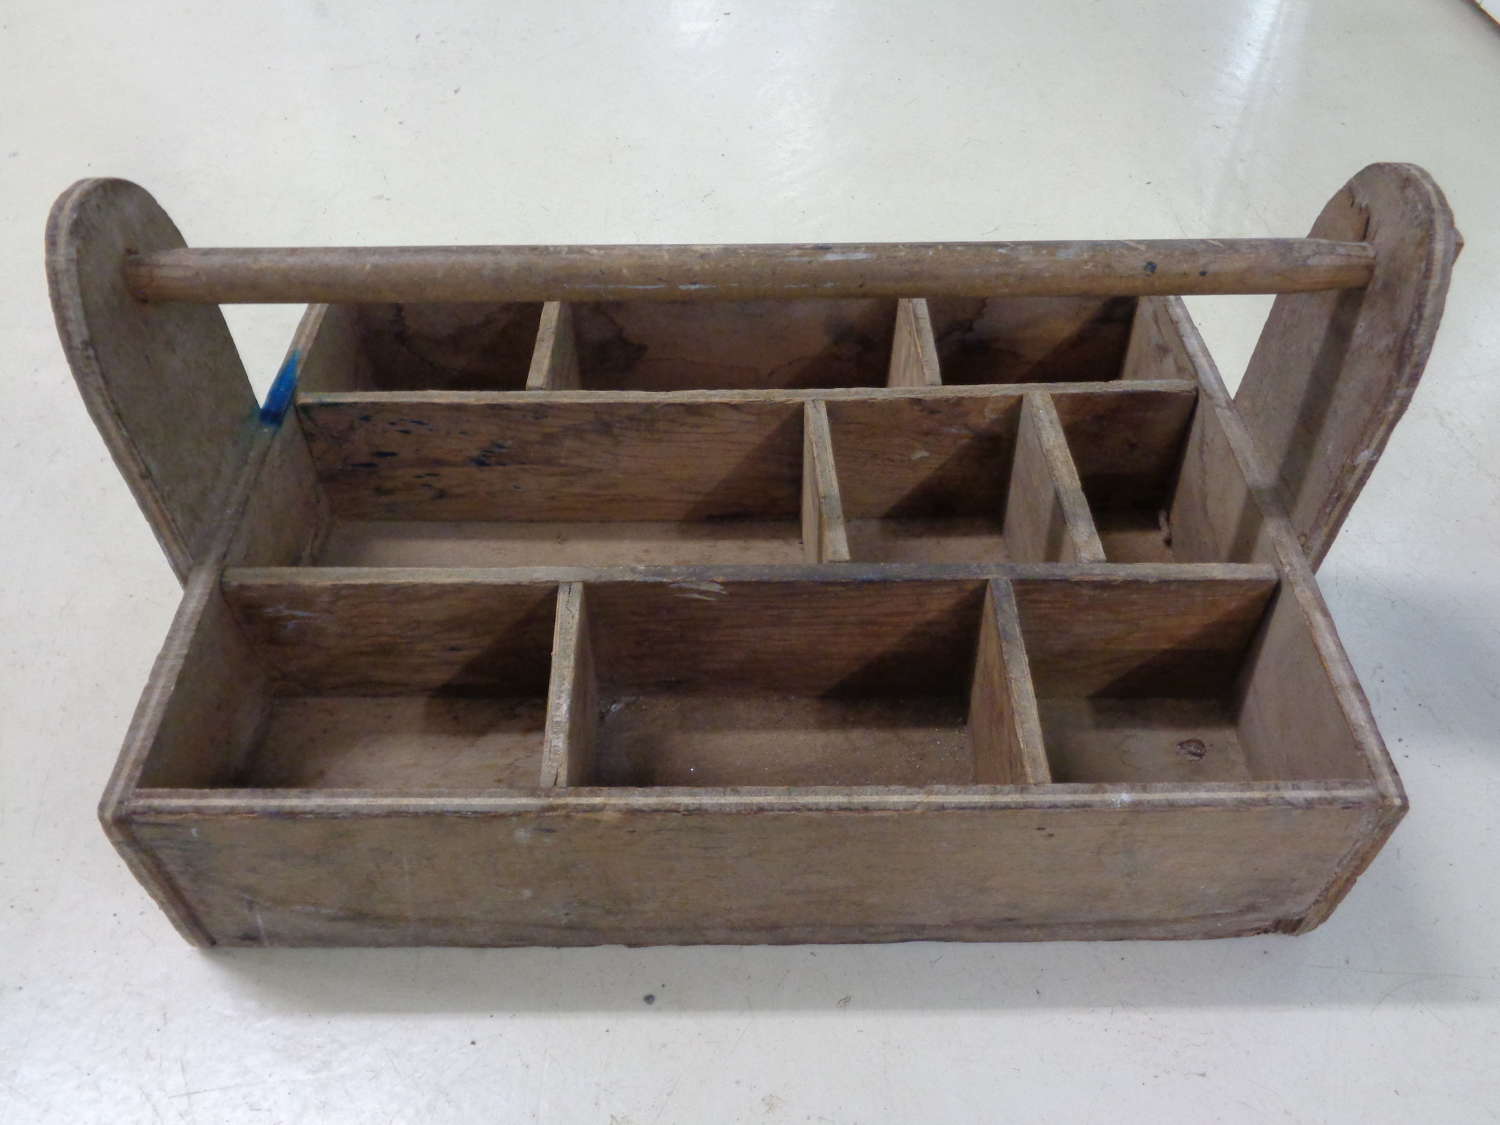 Old Wooden Tool Caddy / Carrier